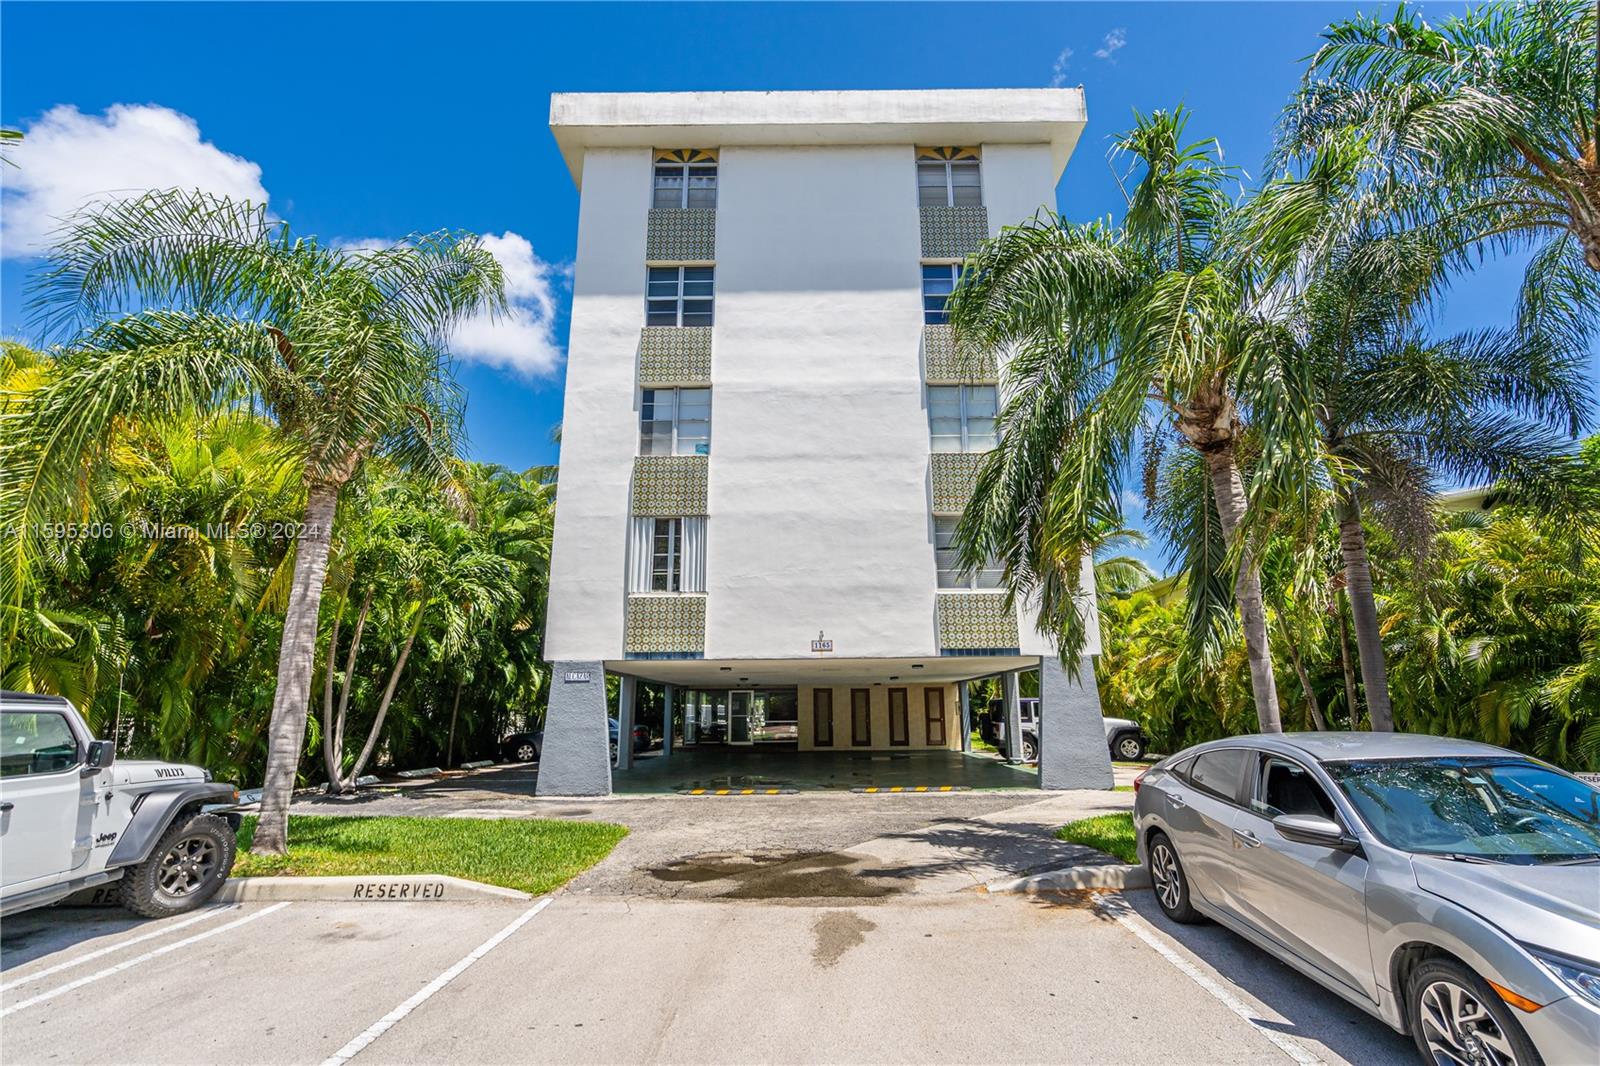 Welcome to this delightfully renovated 2-Beds, 2-Baths apartment in charming Bay Harbor, Florida. Located in a friendly, well-maintained building near 98th Street Park, this beautiful unit offers modern living, comfort, and affordability close to top-rated schools. As a resident, enjoy the inviting community pool and assigned parking spot. The sunlit, open-concept living area features windows on three sides and tasteful brand-new furnishings. The updated kitchen showcases stainless steel appliances, abundant countertop space, and storage. Both spacious bedrooms provide generous closet space, while the renovated bathrooms offer contemporary fixtures and finishes. Ideally situated near the renowned Ruth K. Broad Bay Harbor K-8 School, Kane Concourse Restaurants and Bal Harbor Shopping